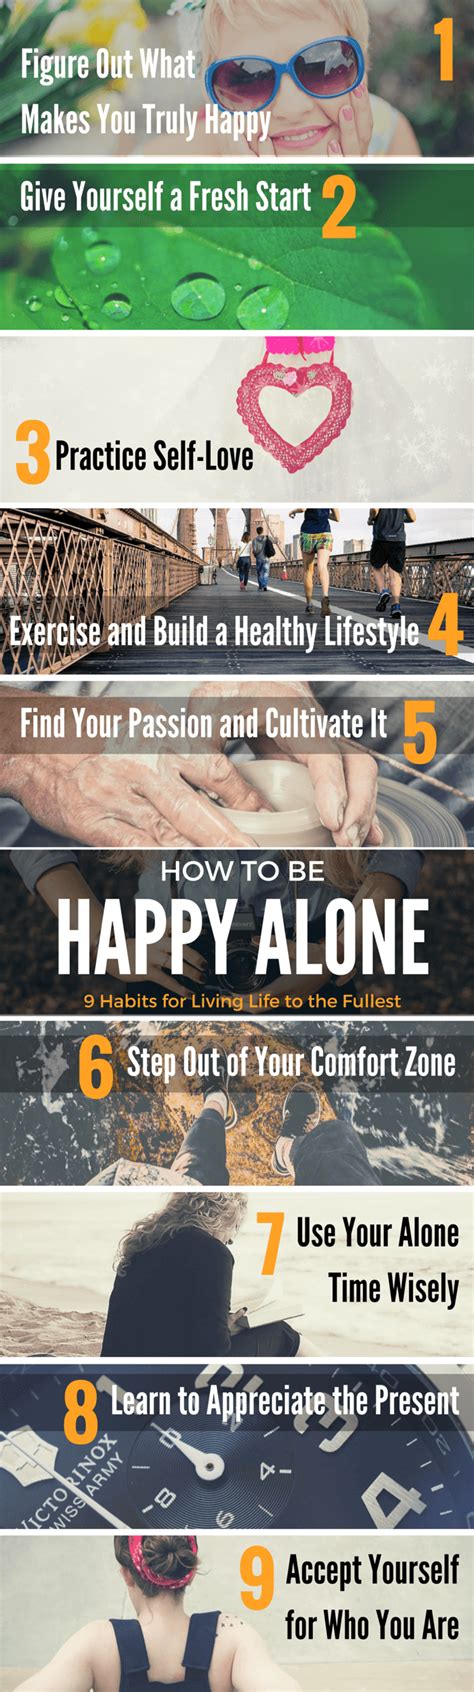 In order to be happy alone, we need to remind ourselves how wonderful, lovable, and special we are. 9 Ways on How to Be Happy (and Live) Alone